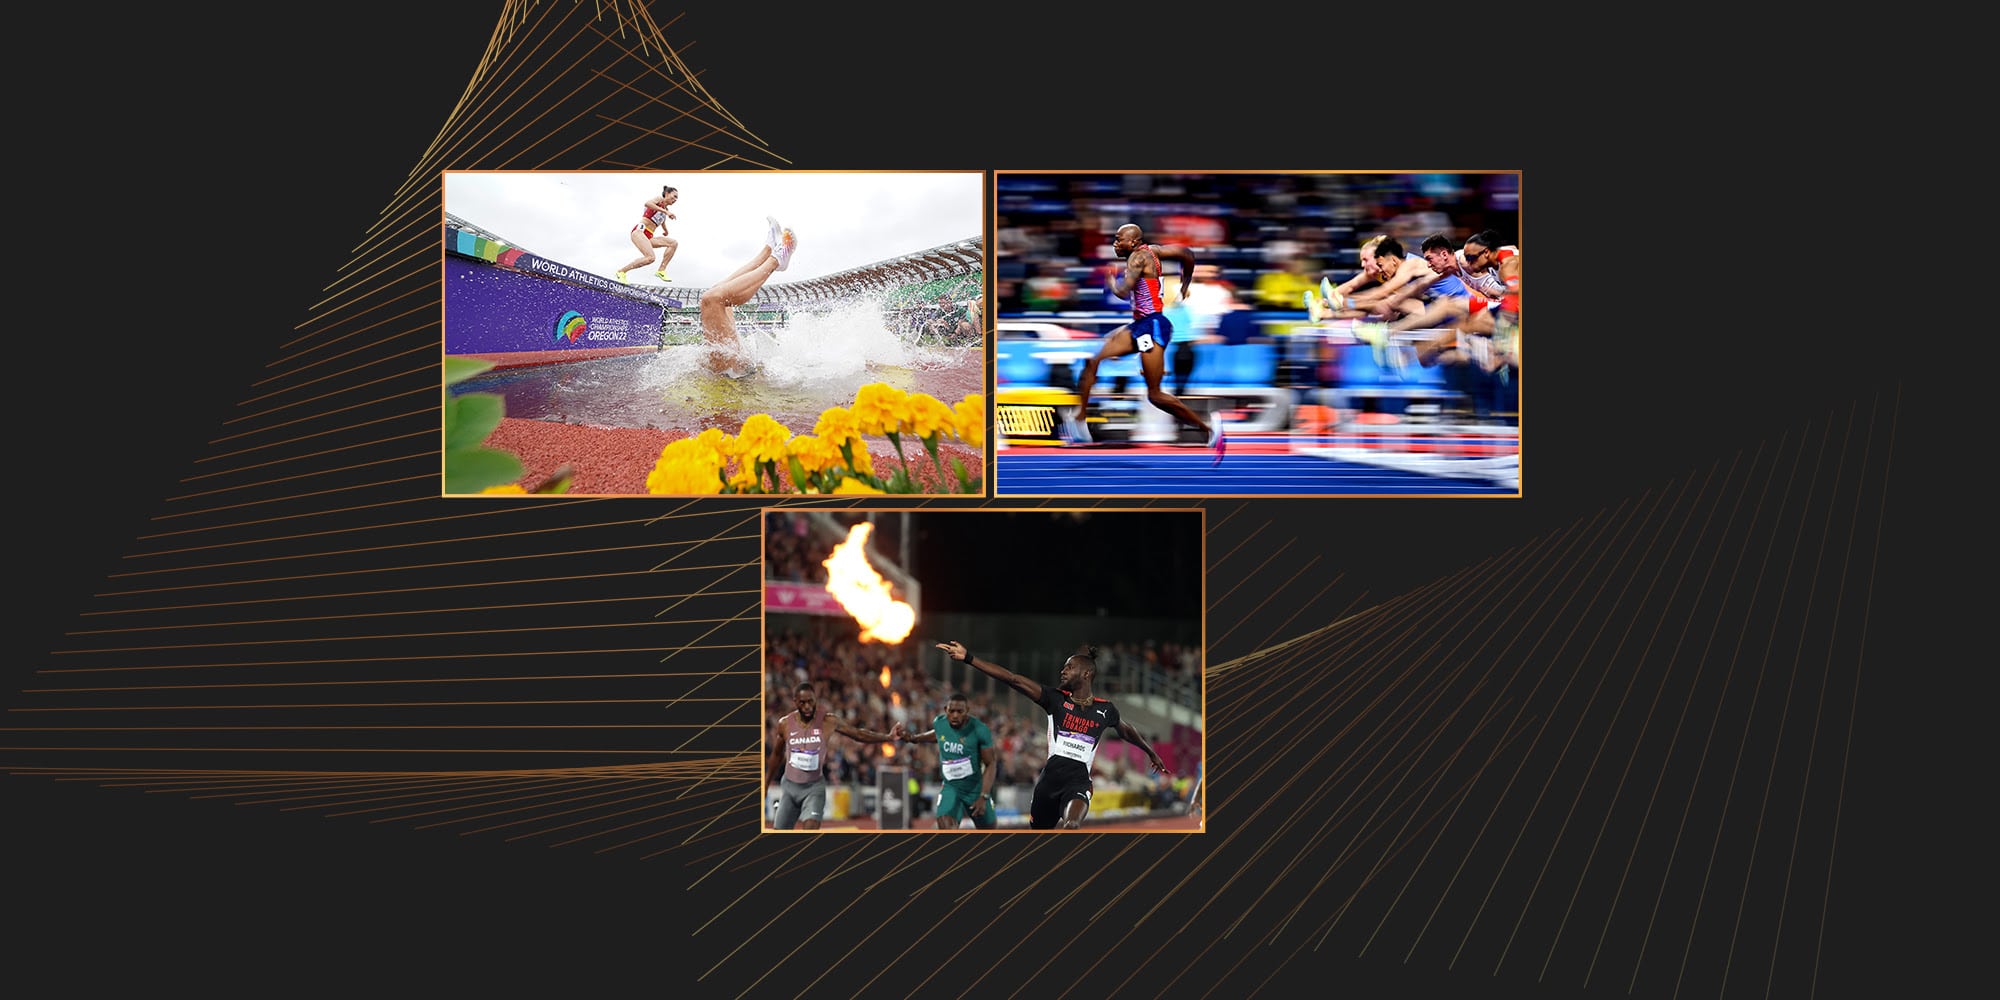 Finalists announced for 2022 world athletics photograph of the year